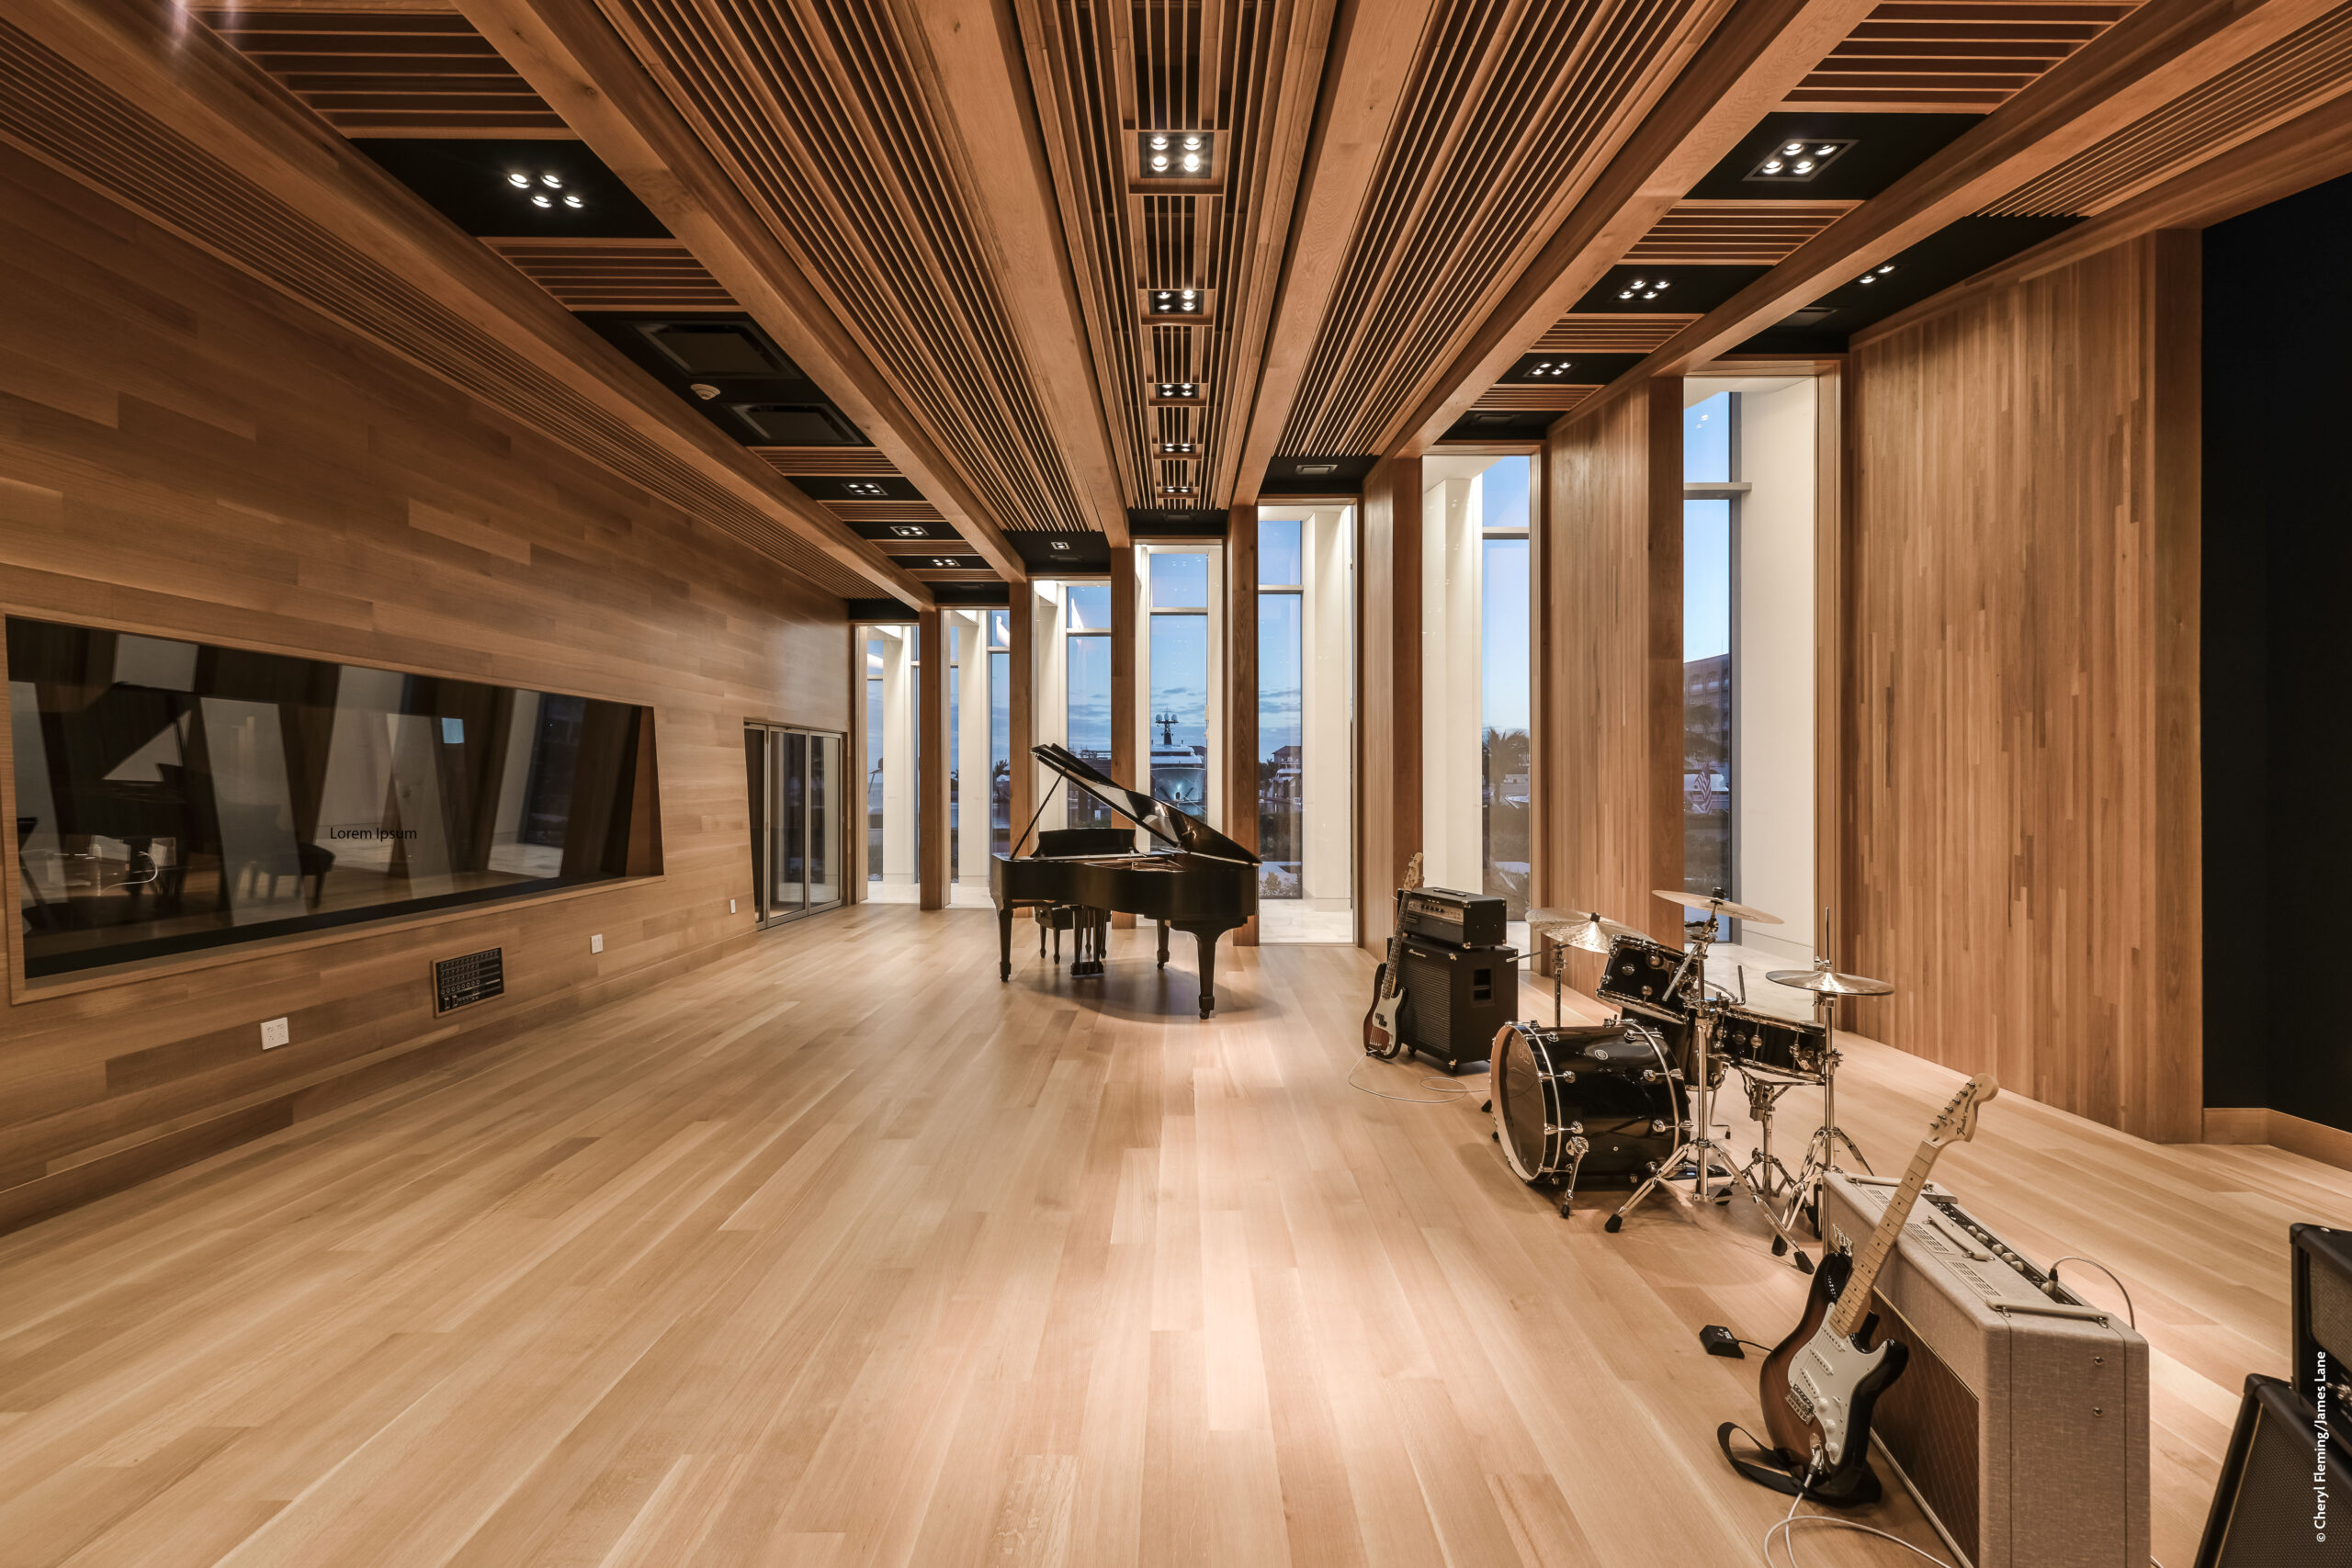 A recording studio with wooden walls and a guitar.